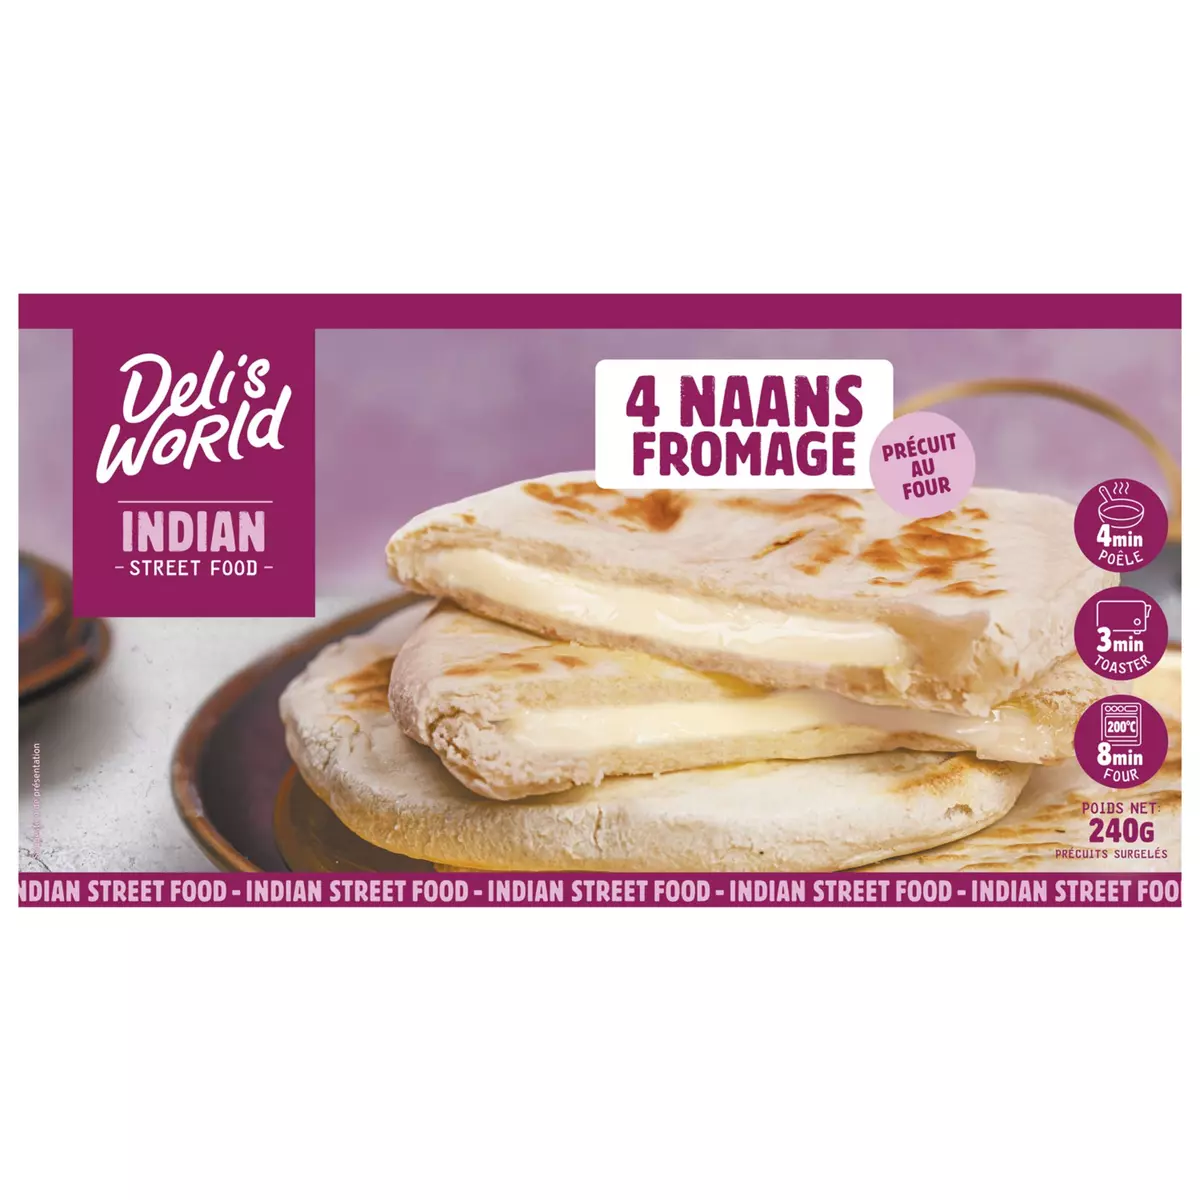 DELI'S WORLD Naan au fromage 4 pièces 240g